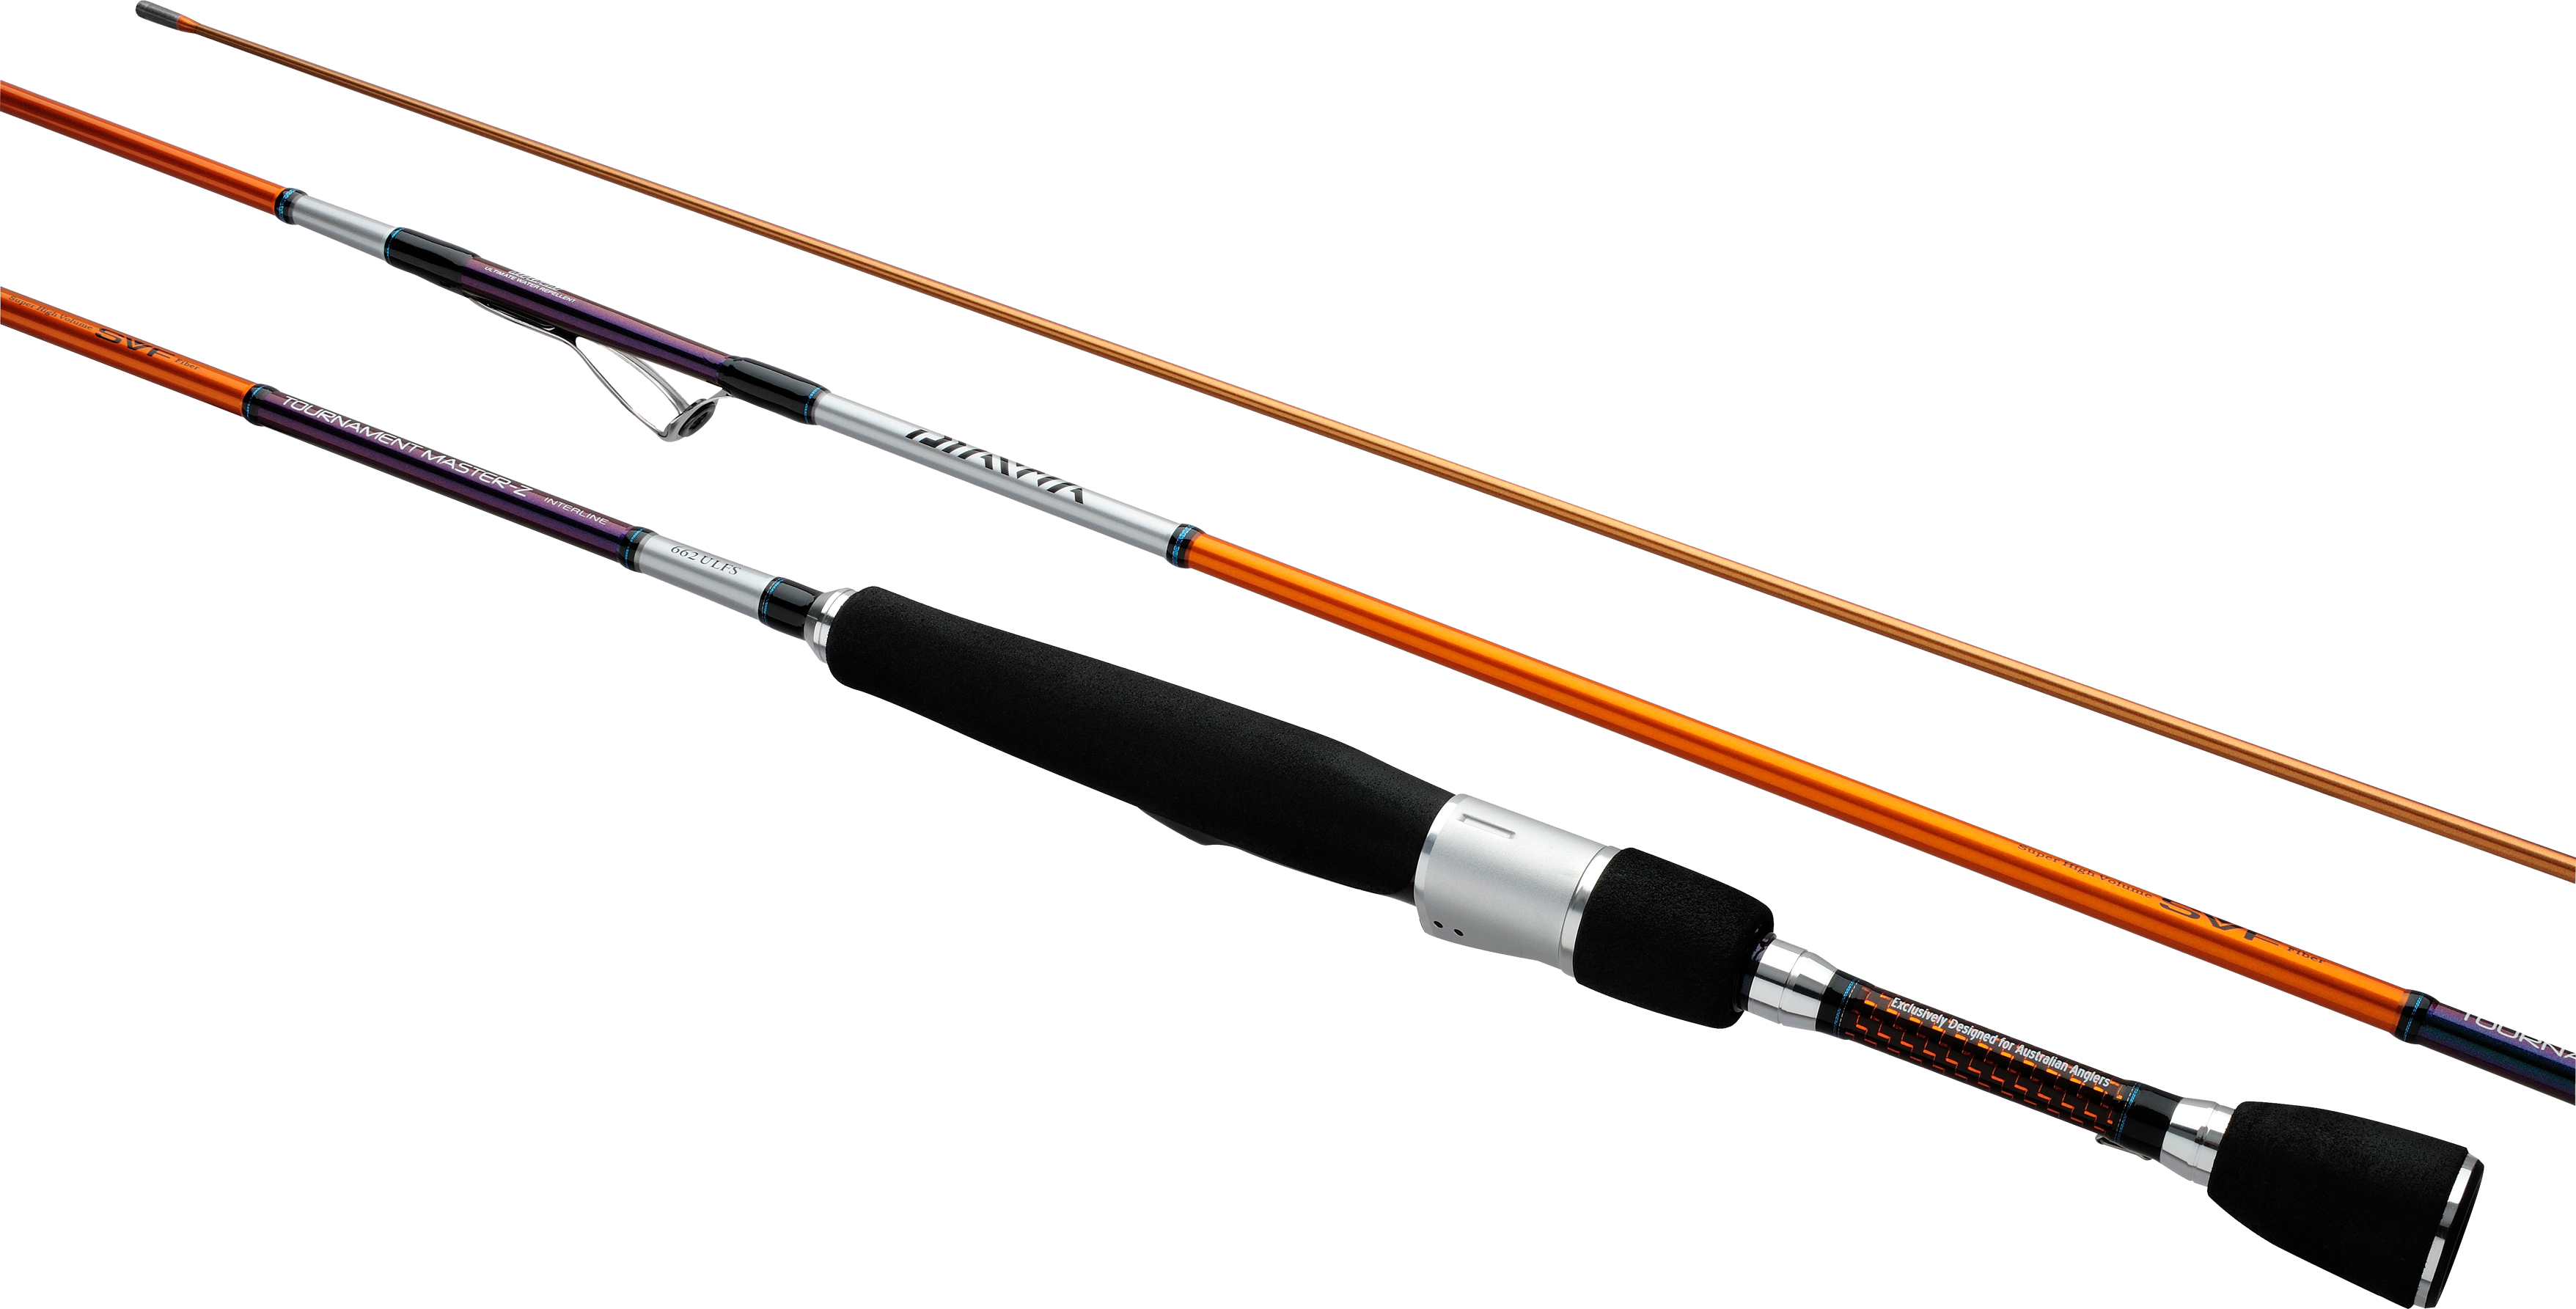 Fishing Rod Png Image - Fishing Pole, Transparent background PNG HD thumbnail